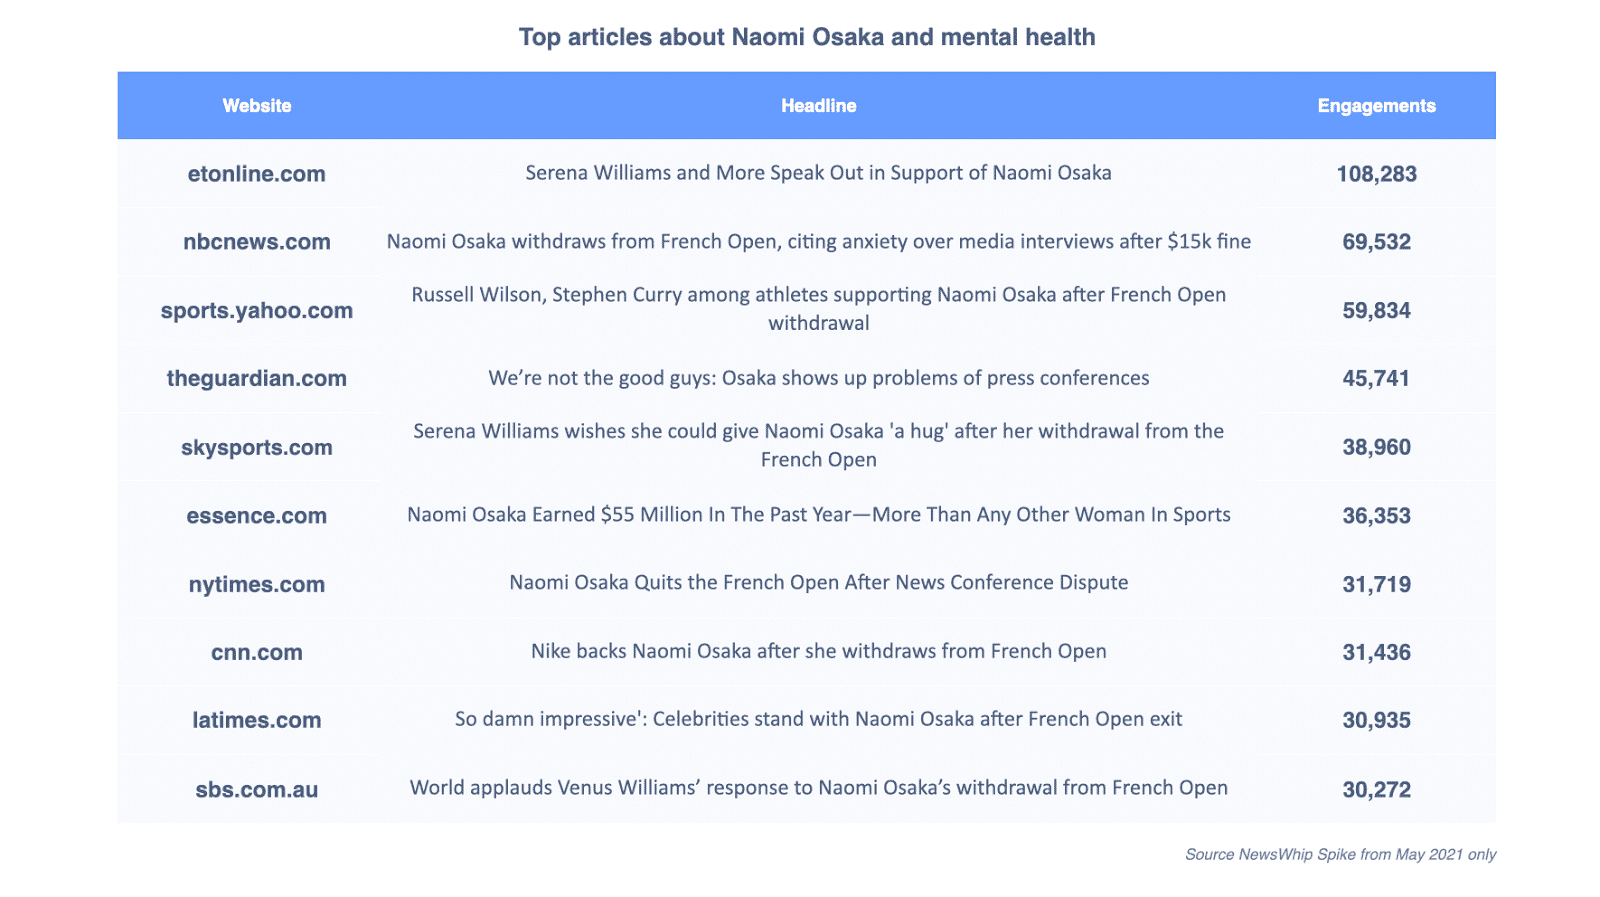 Chart showing the top stories about Naomi Osaka and mental health in May 2021